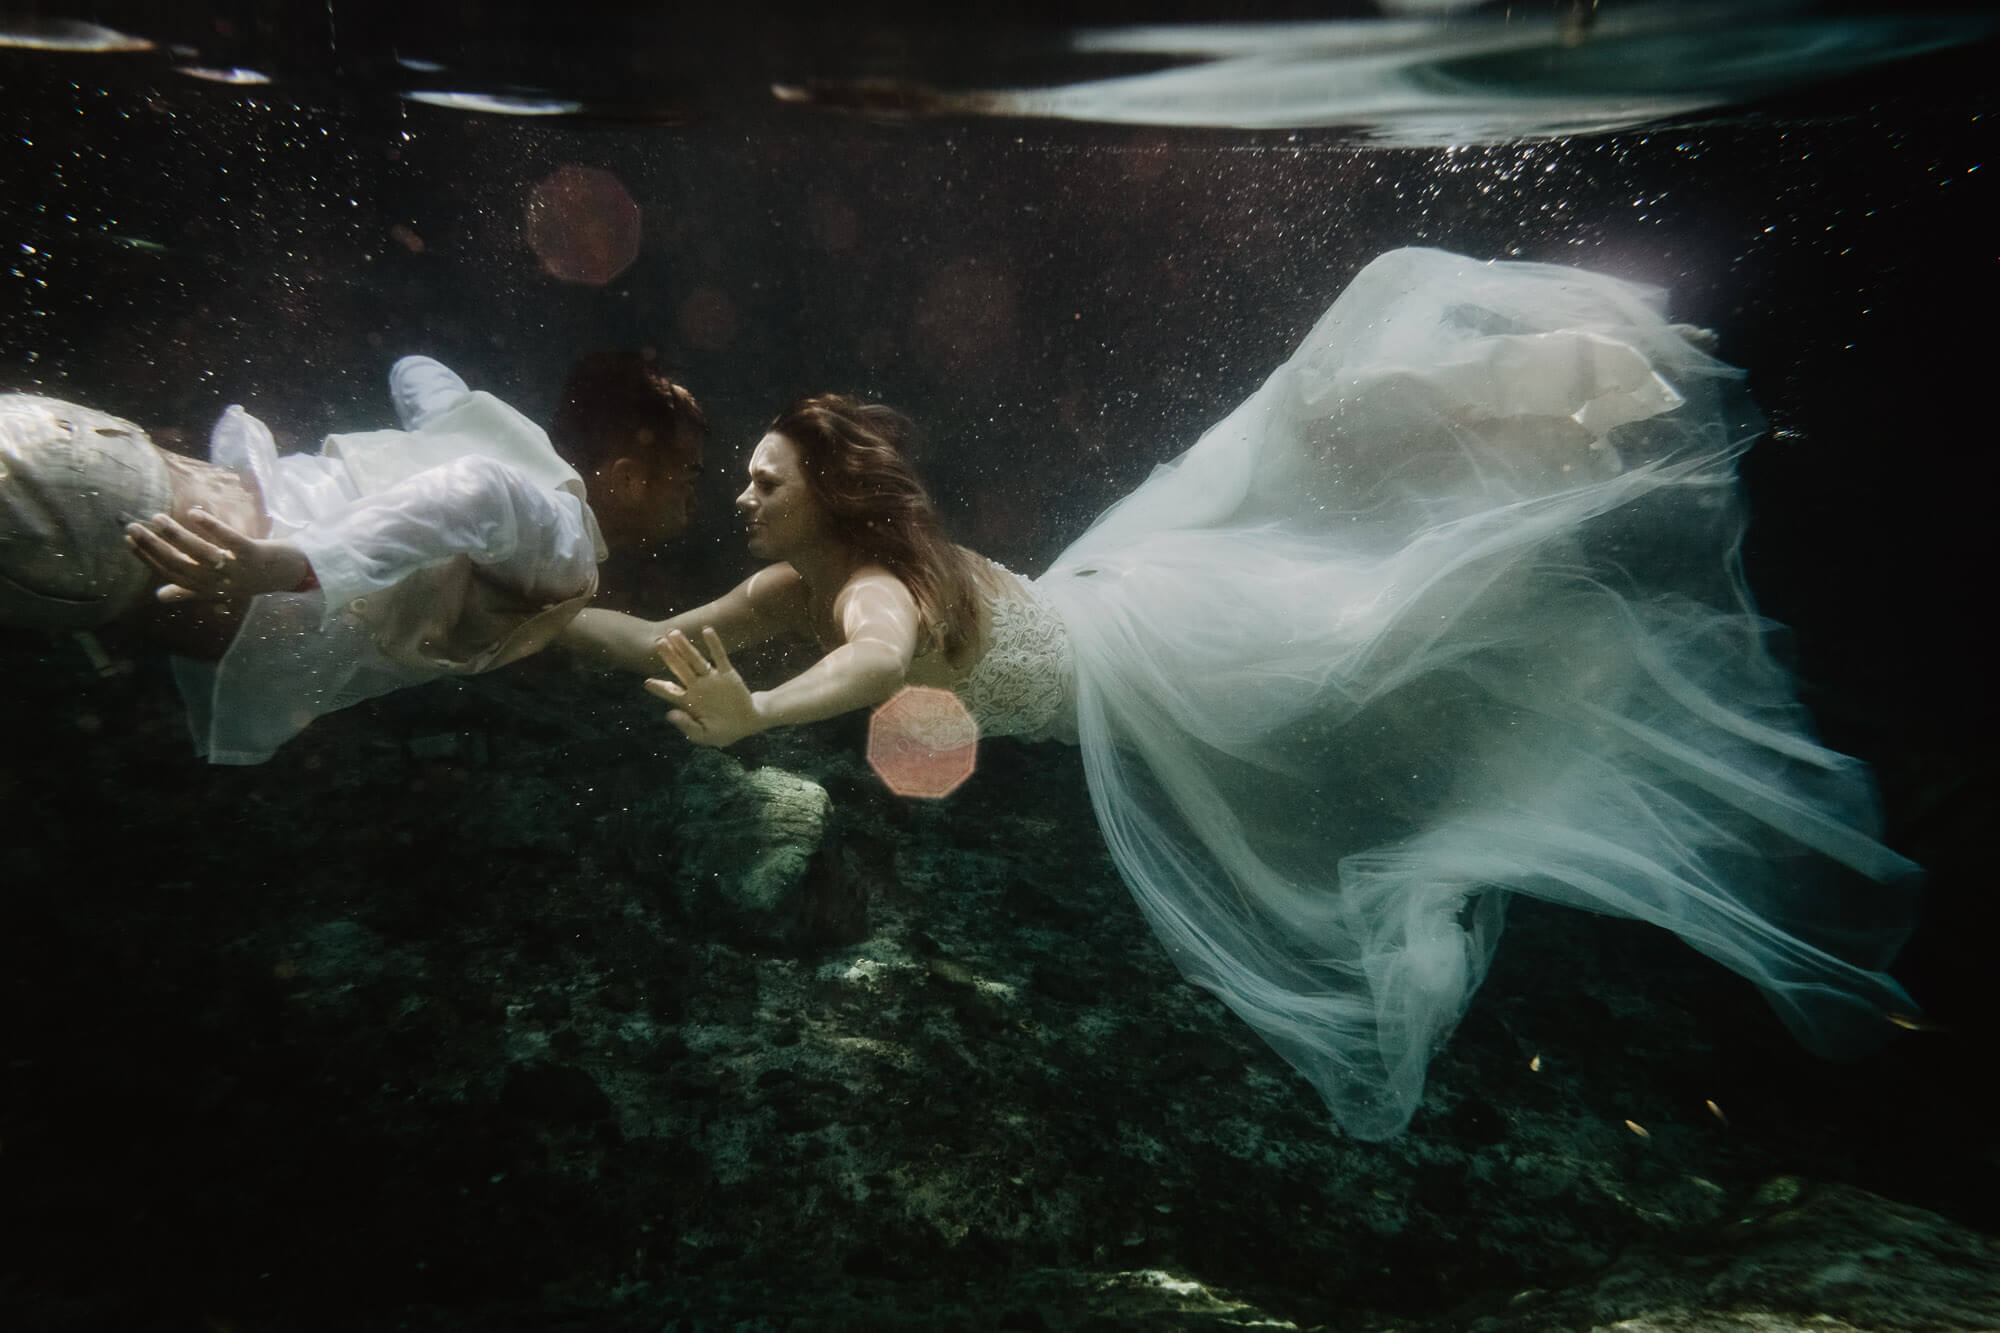 An underwater wedding photograph of a couple at aMEXICO FINEART DESTINATIONWEDDING AT PLAYA DEL CARMEN